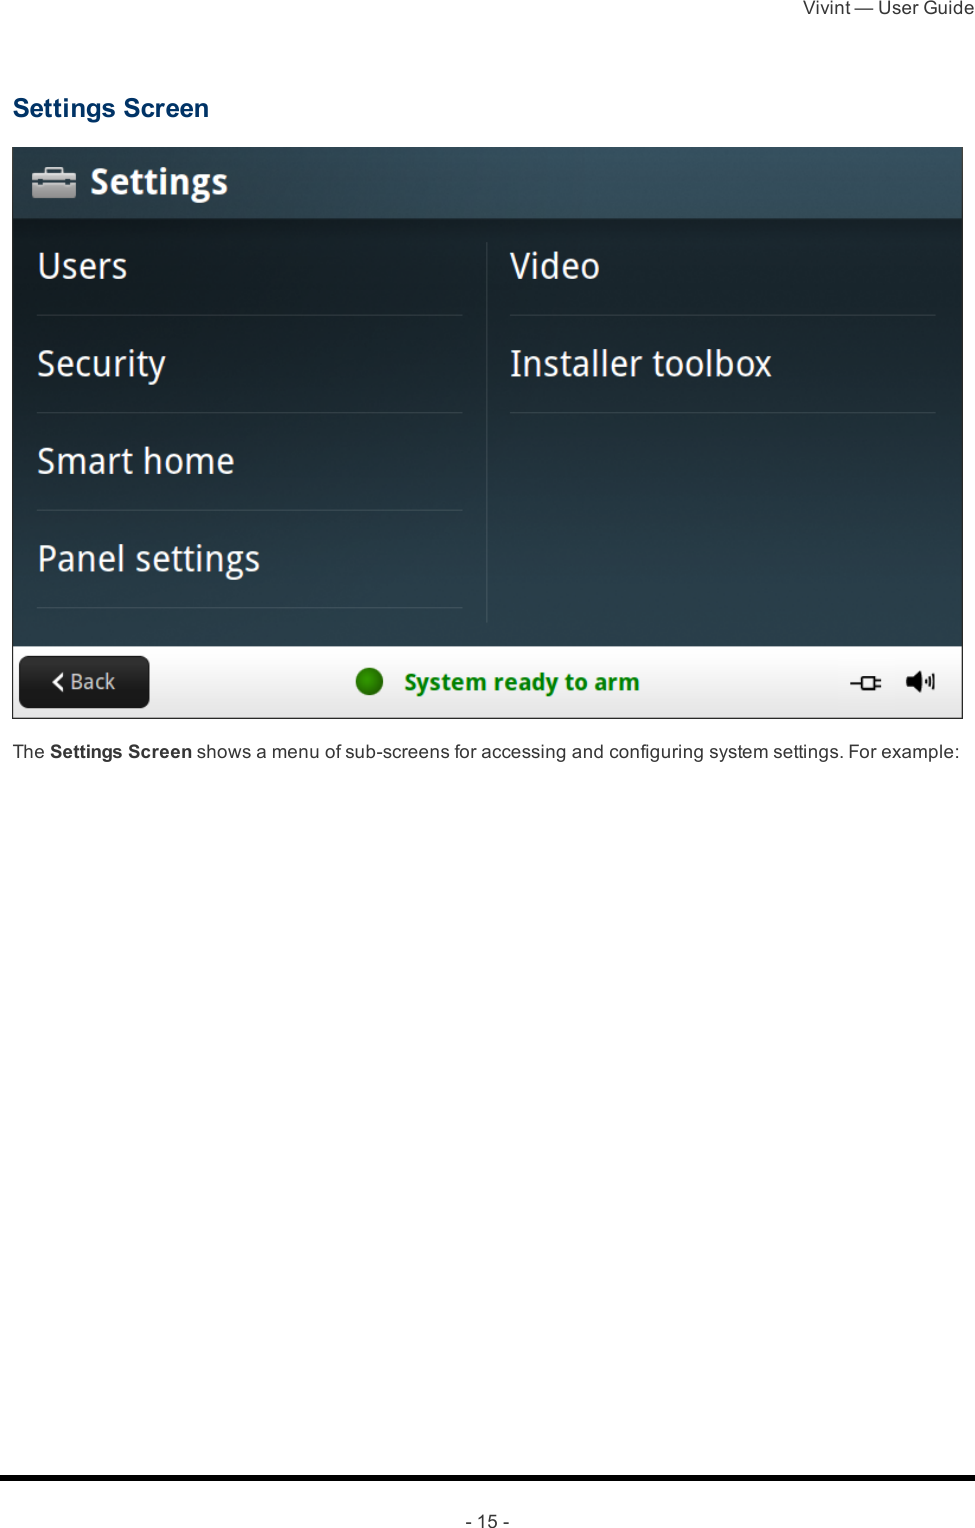 Vivint — User Guide- 15 -Settings ScreenThe Settings Screen shows a menu of sub-screens for accessing and configuring system settings. For example: